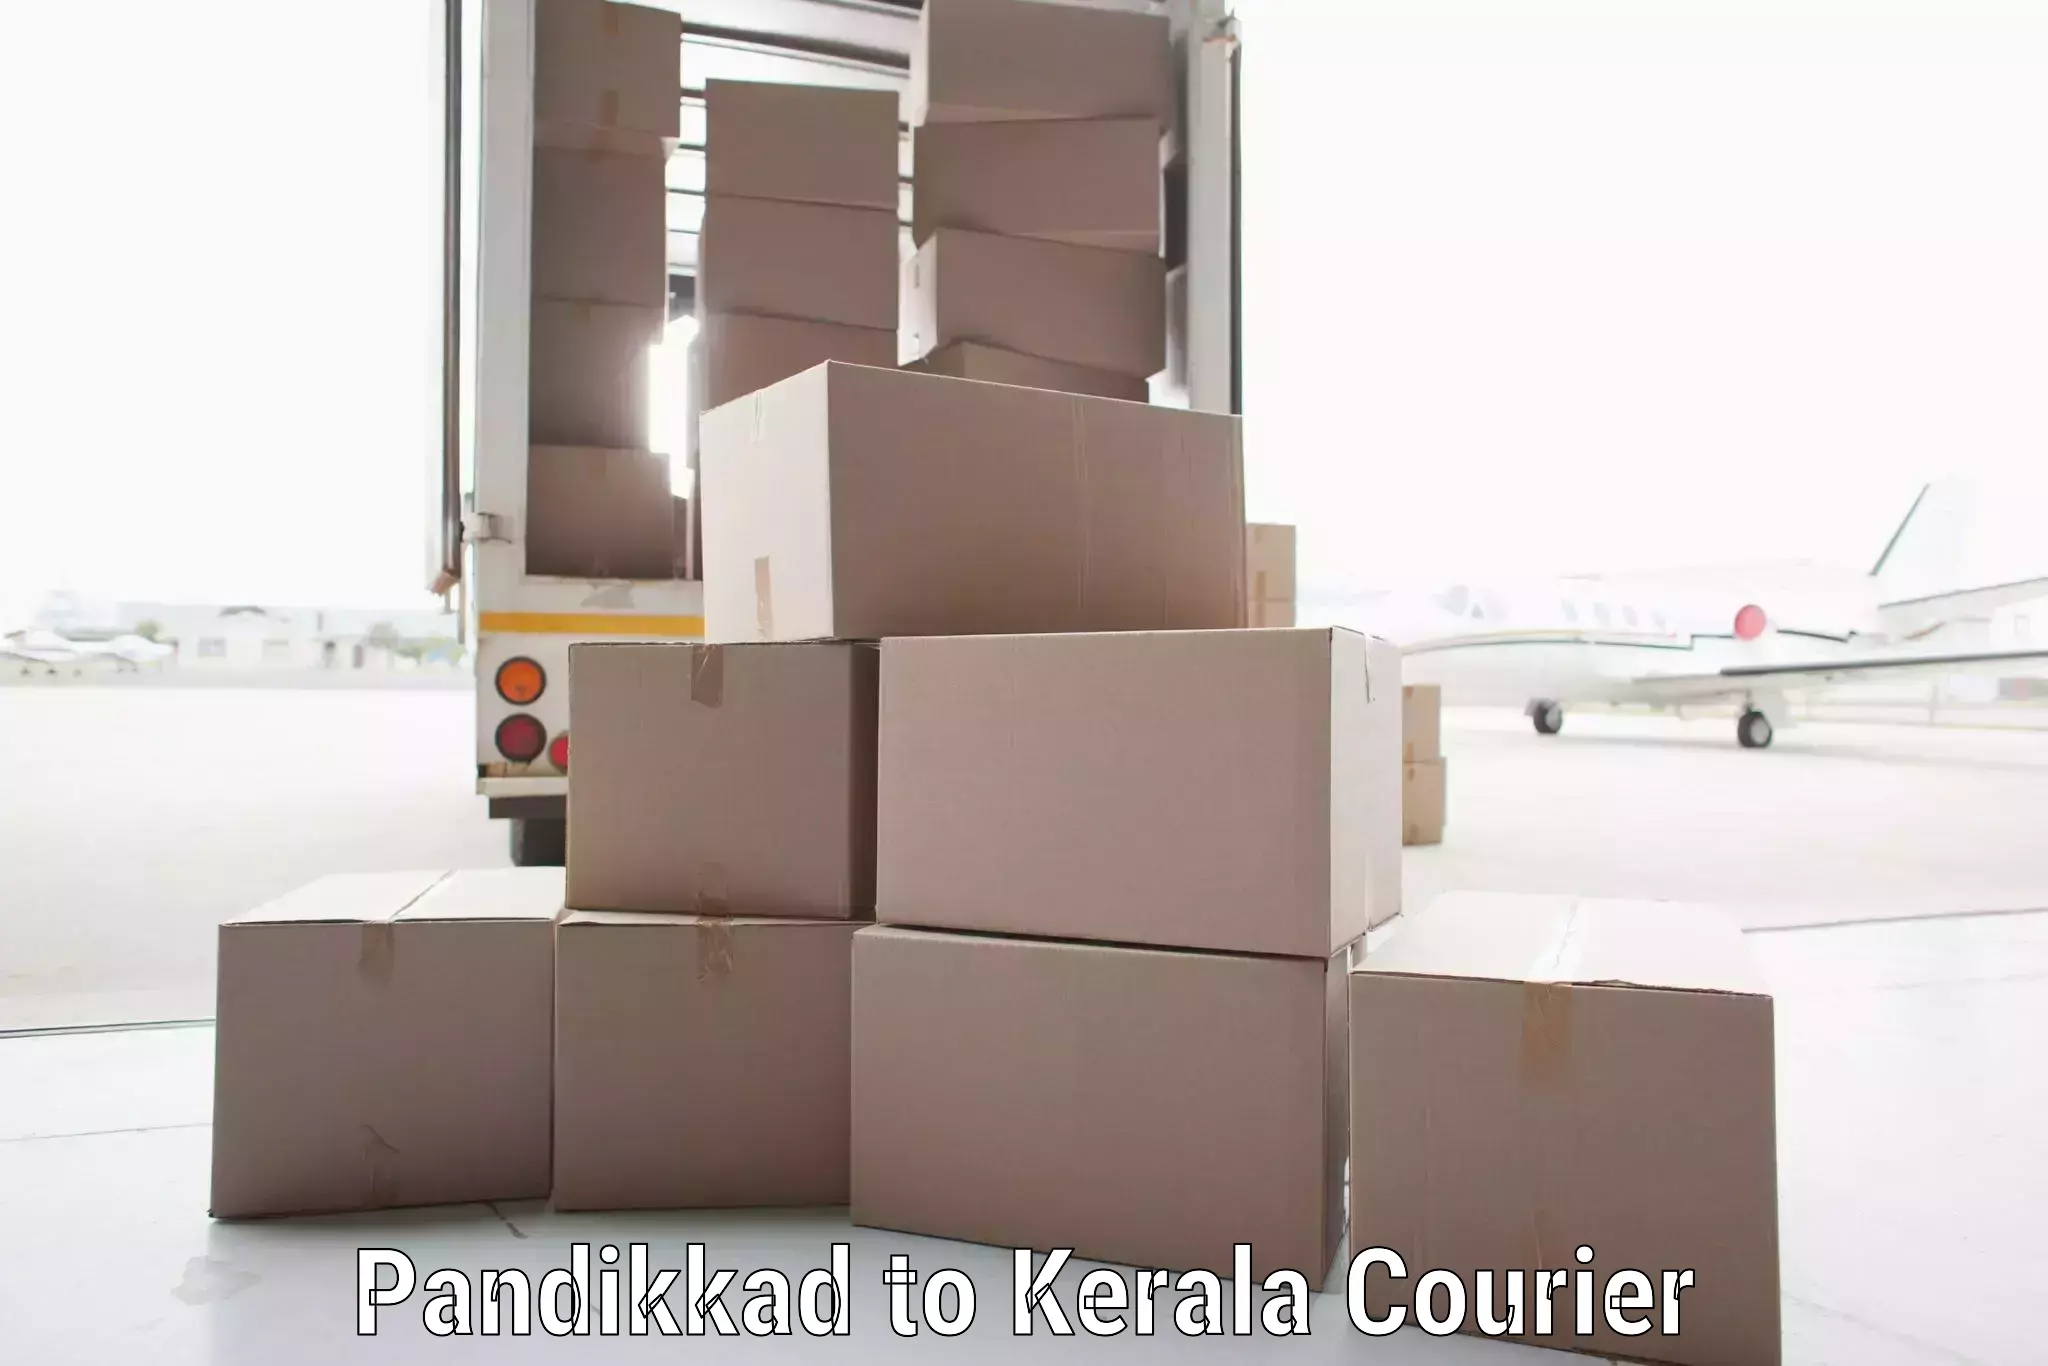 End-to-end delivery Pandikkad to Cochin Port Kochi